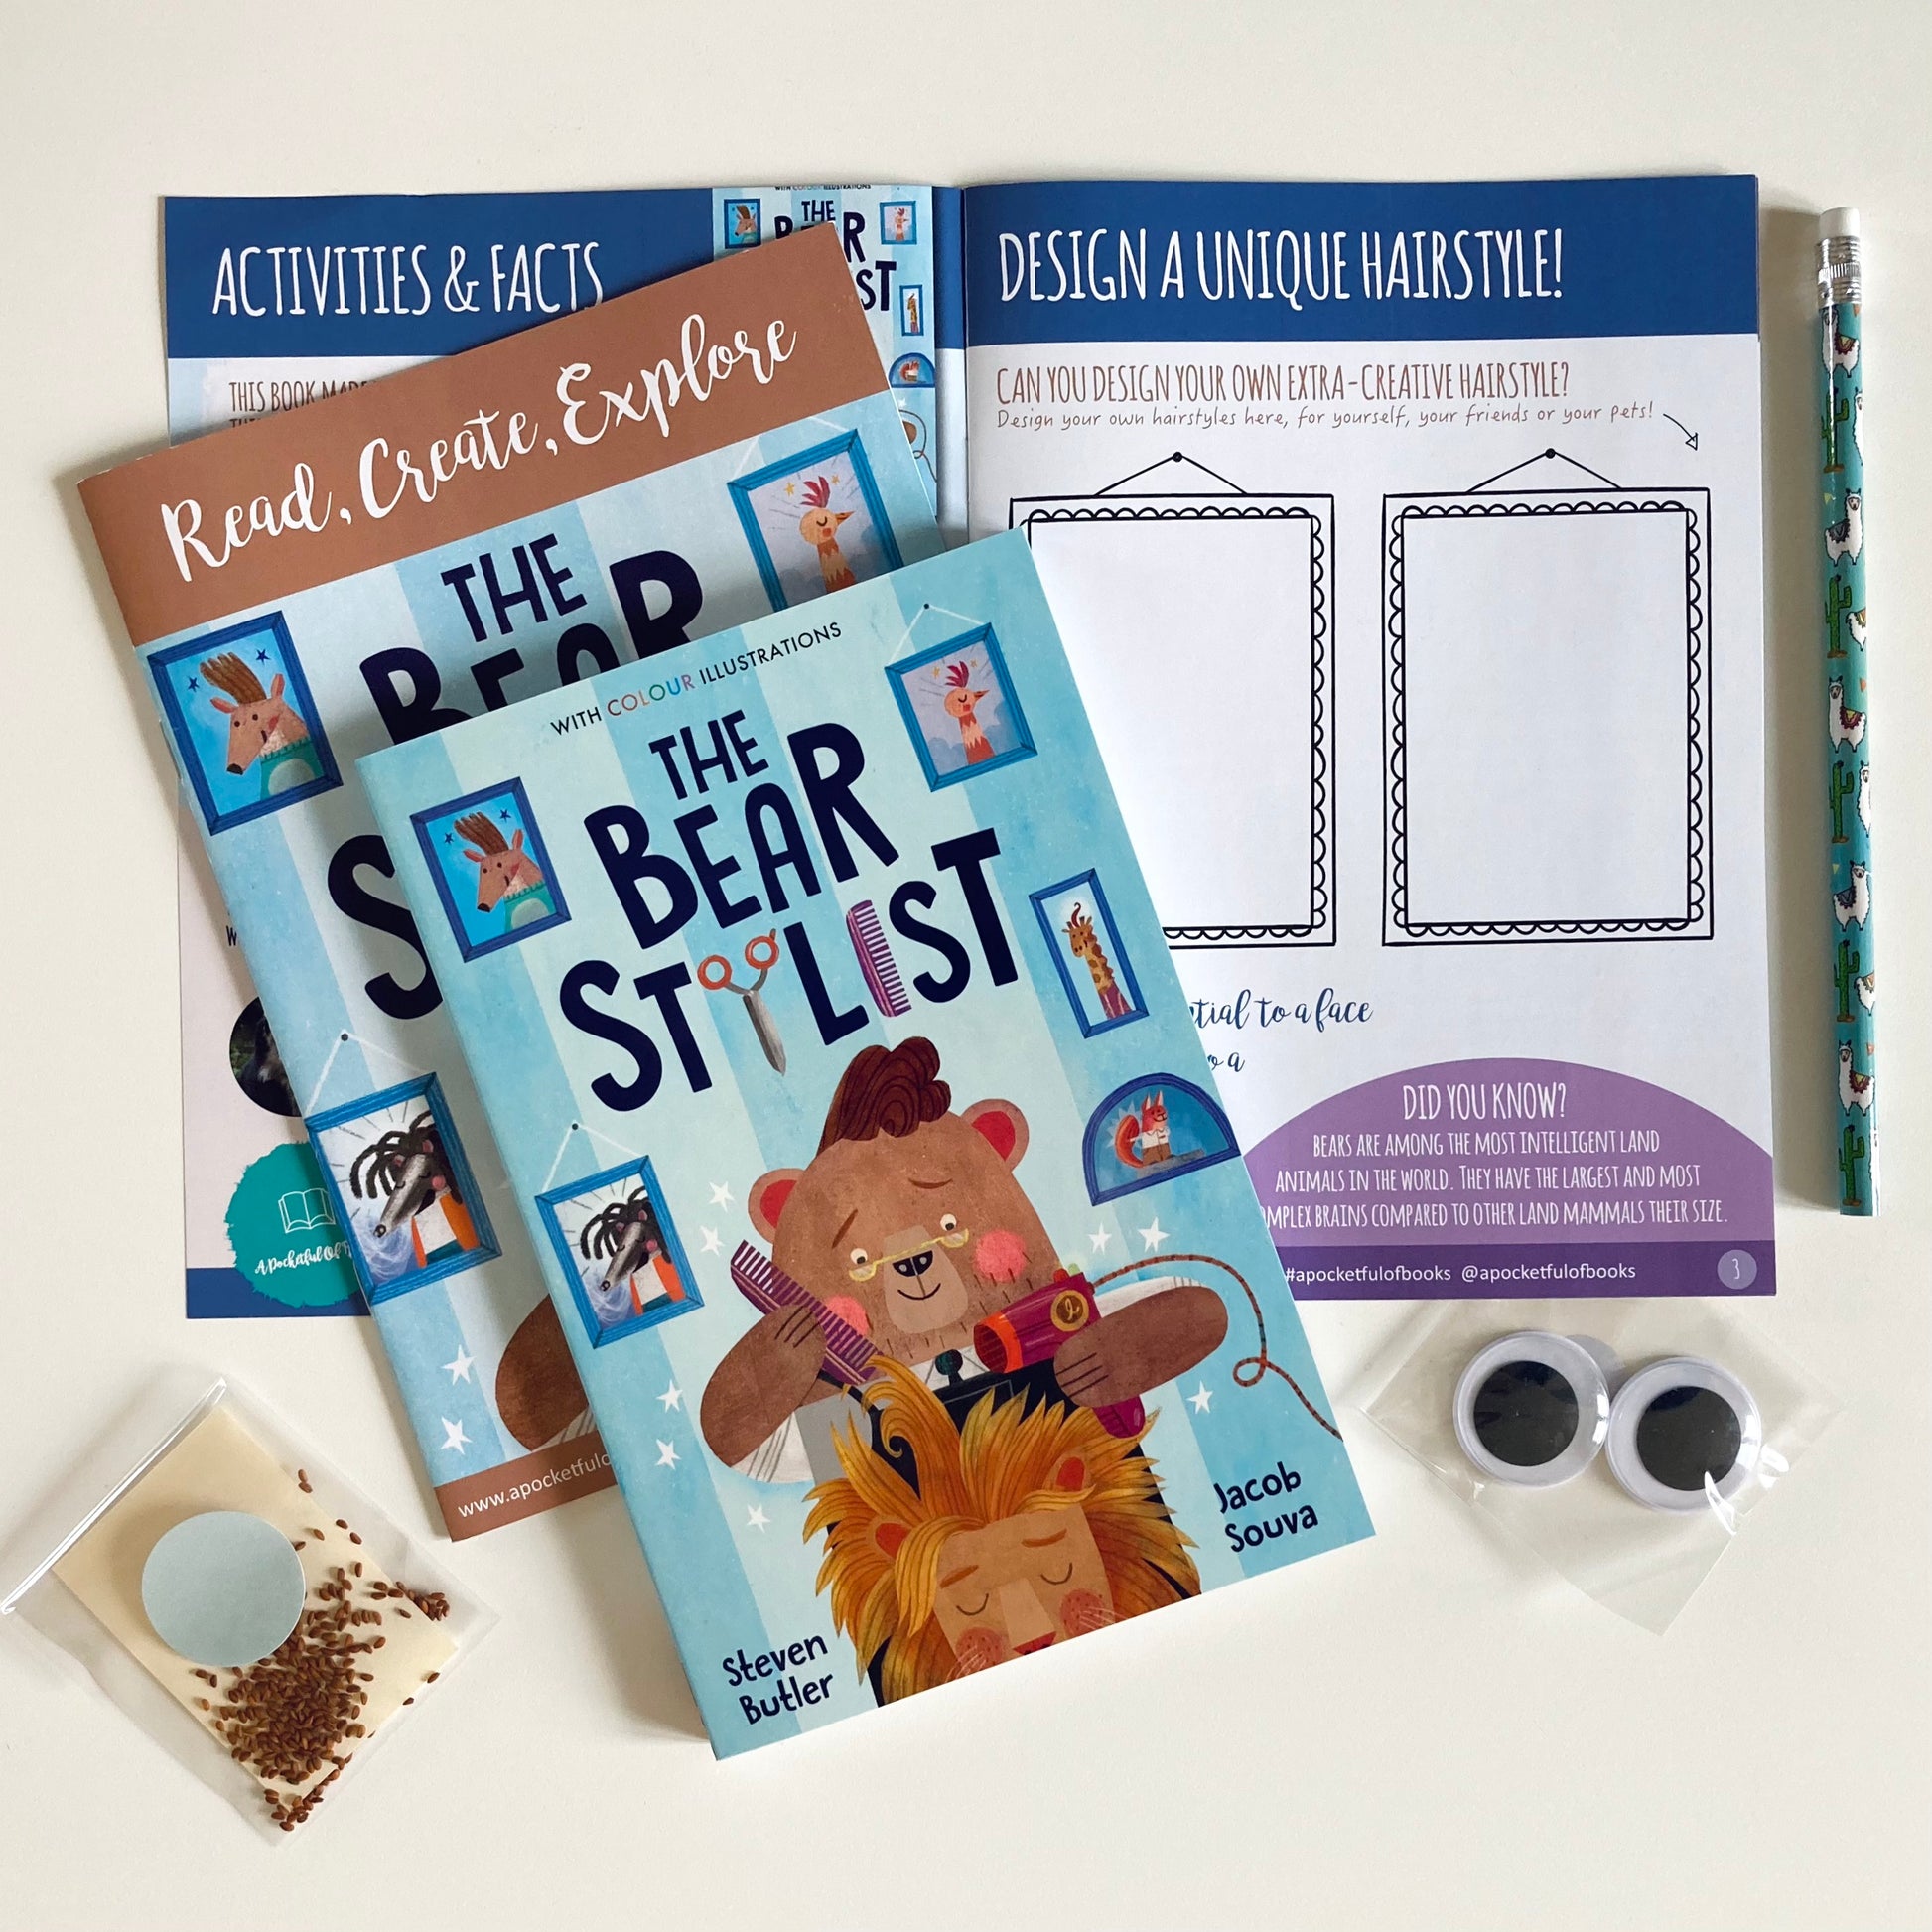 Monthly book subscription box for kids featuring The Bear Stylist.